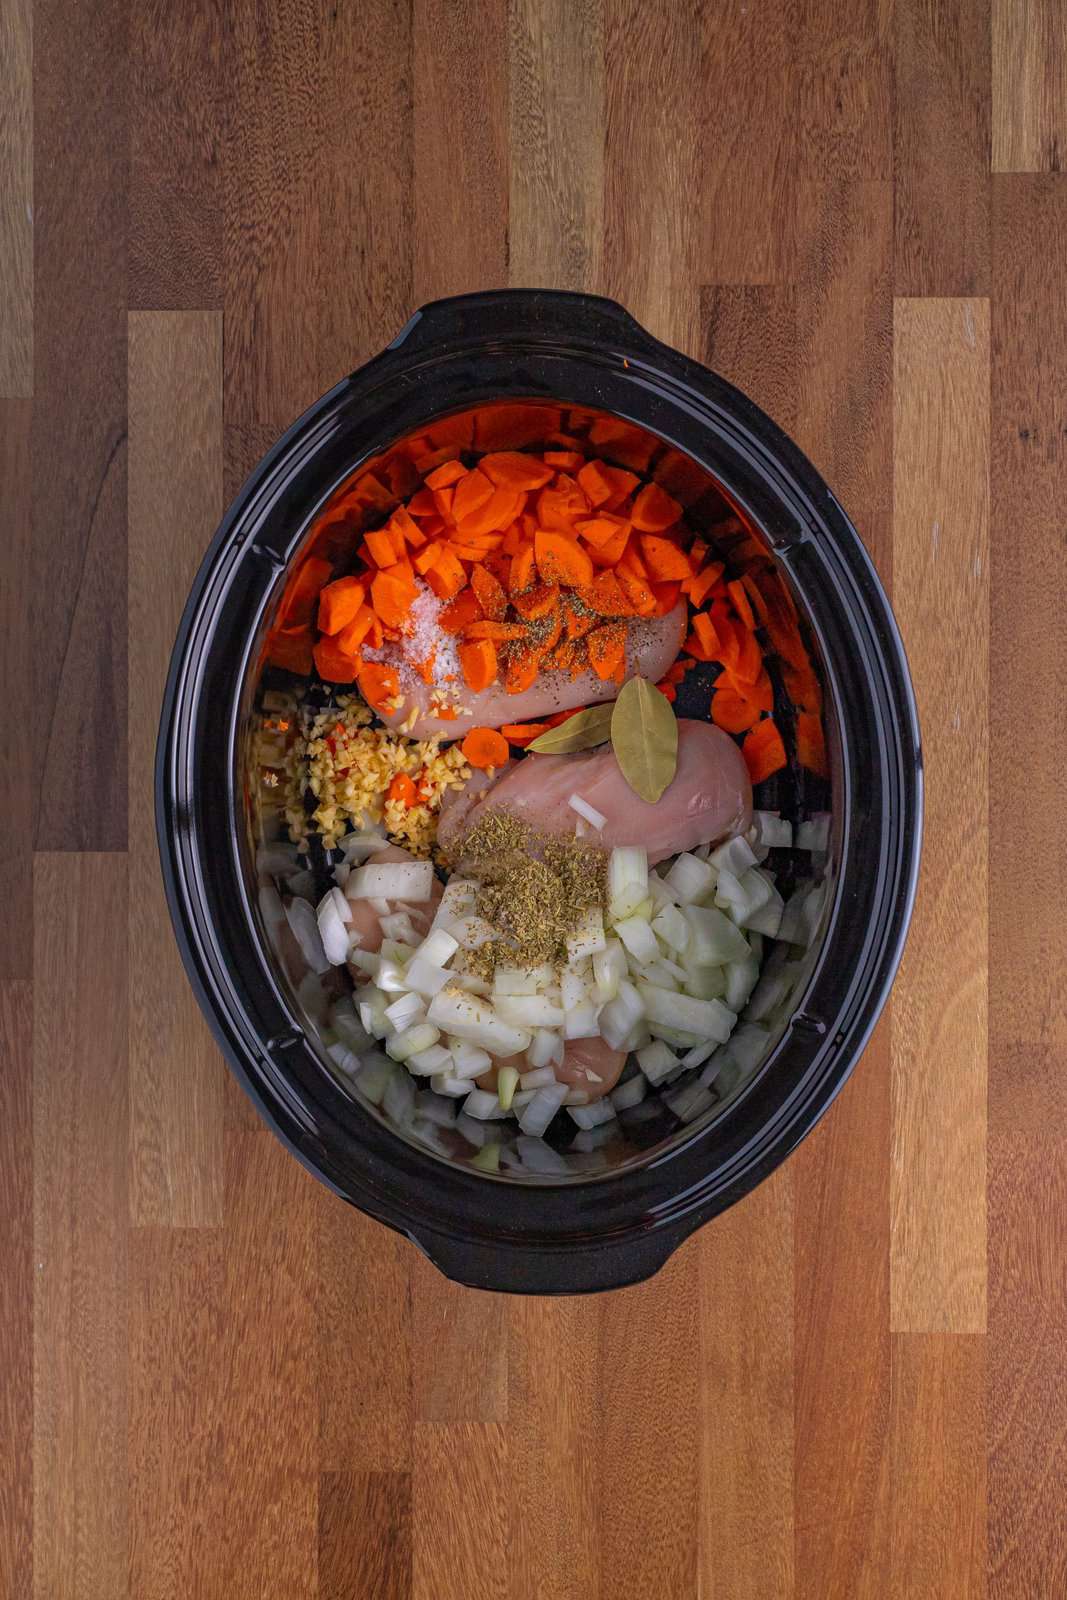 Looking down on a Slow Cooker insert with chicken breasts, carrots, onion, garlic, bay leaves, Italian seasoning, salt, and pepper.